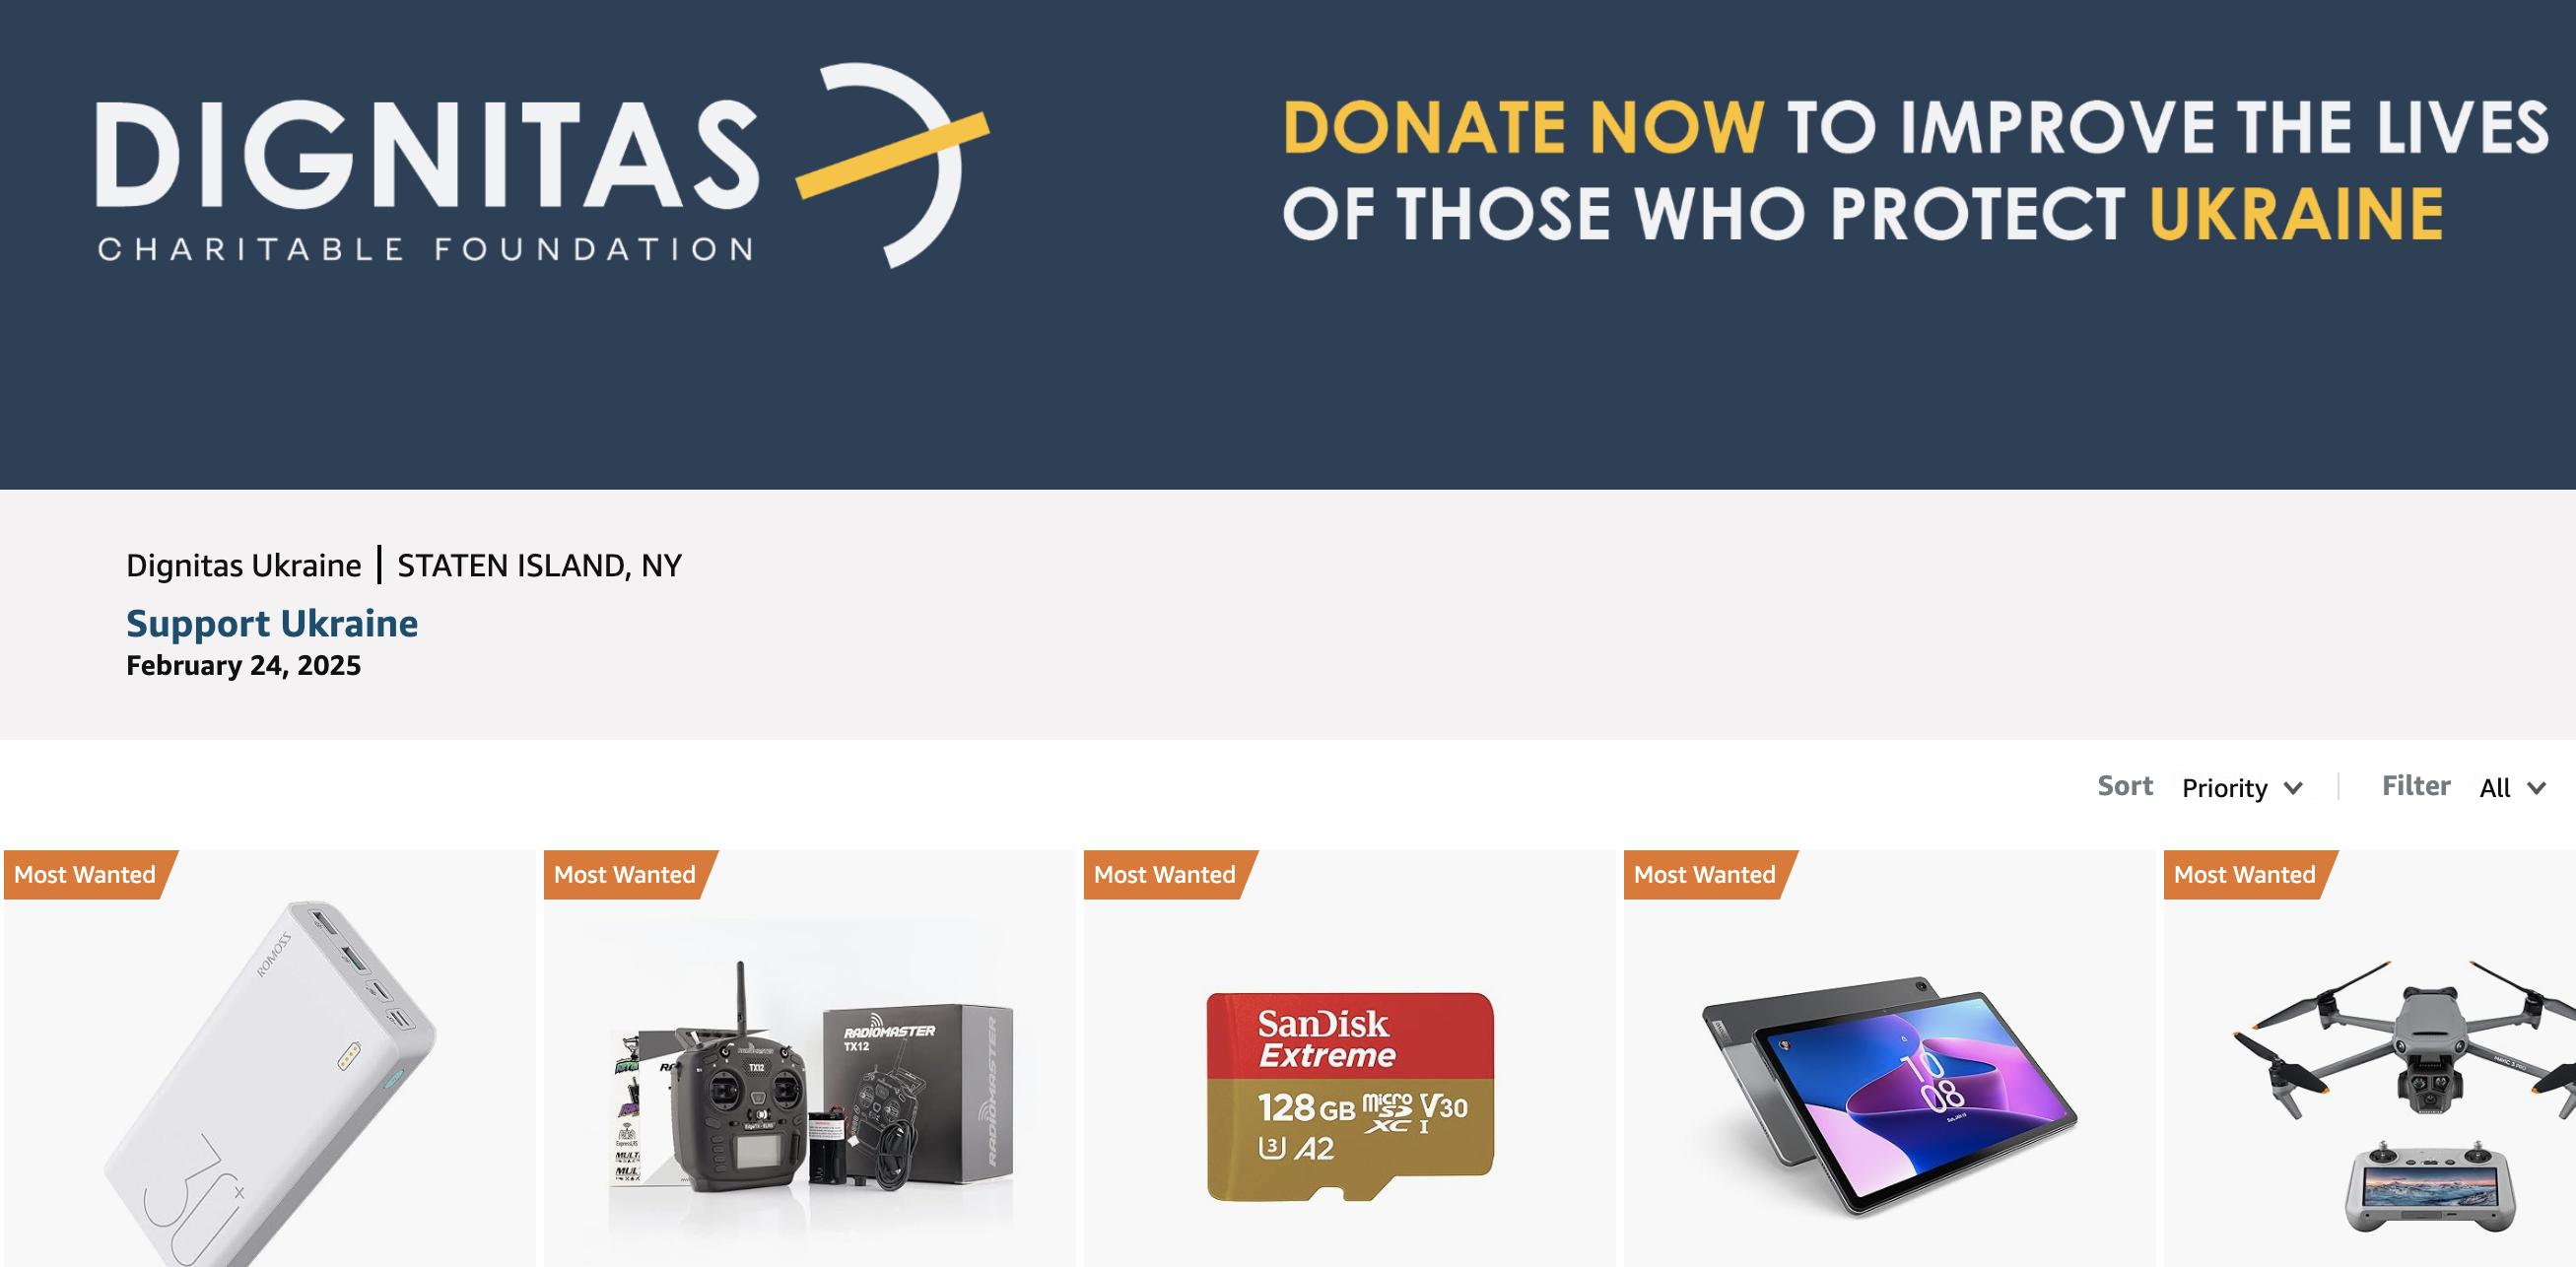 Donating to Ukraine: Why those products are  wish important